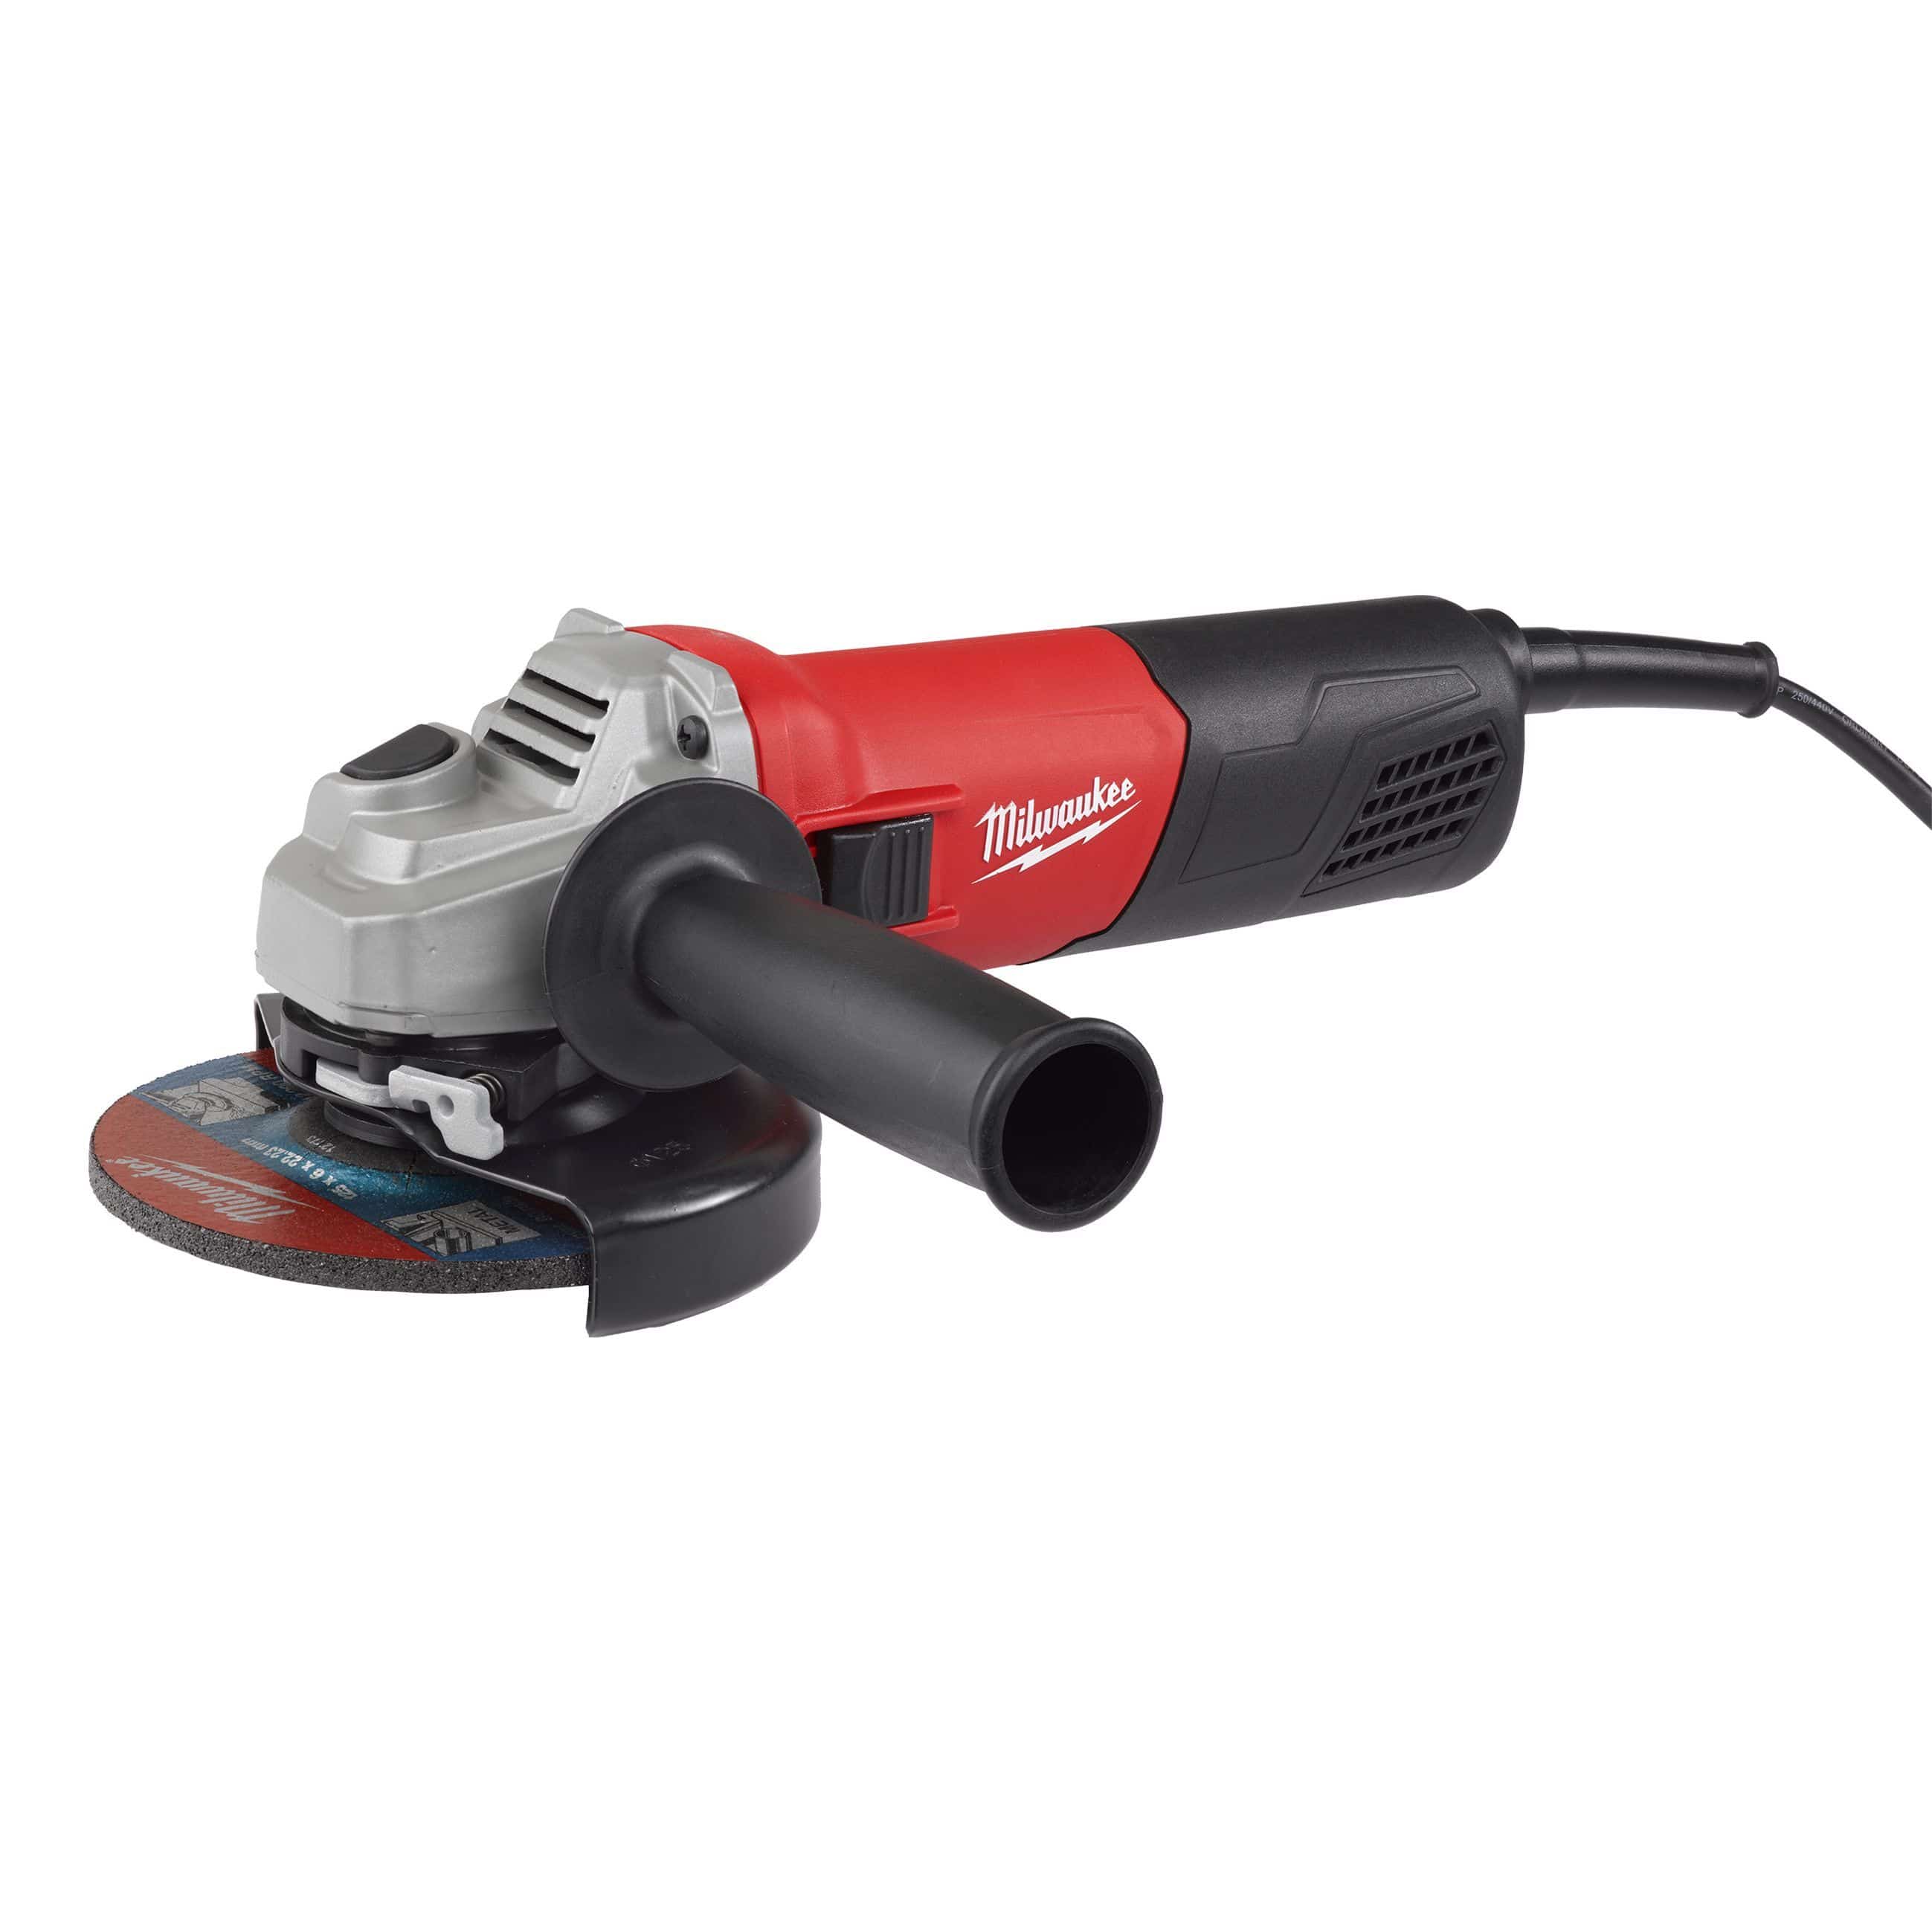 Milwaukee Compact Angle Grinder 115 mm 800W - AG 800-115 E | Supply Master | Accra, Ghana Tools Building Steel Engineering Hardware tool